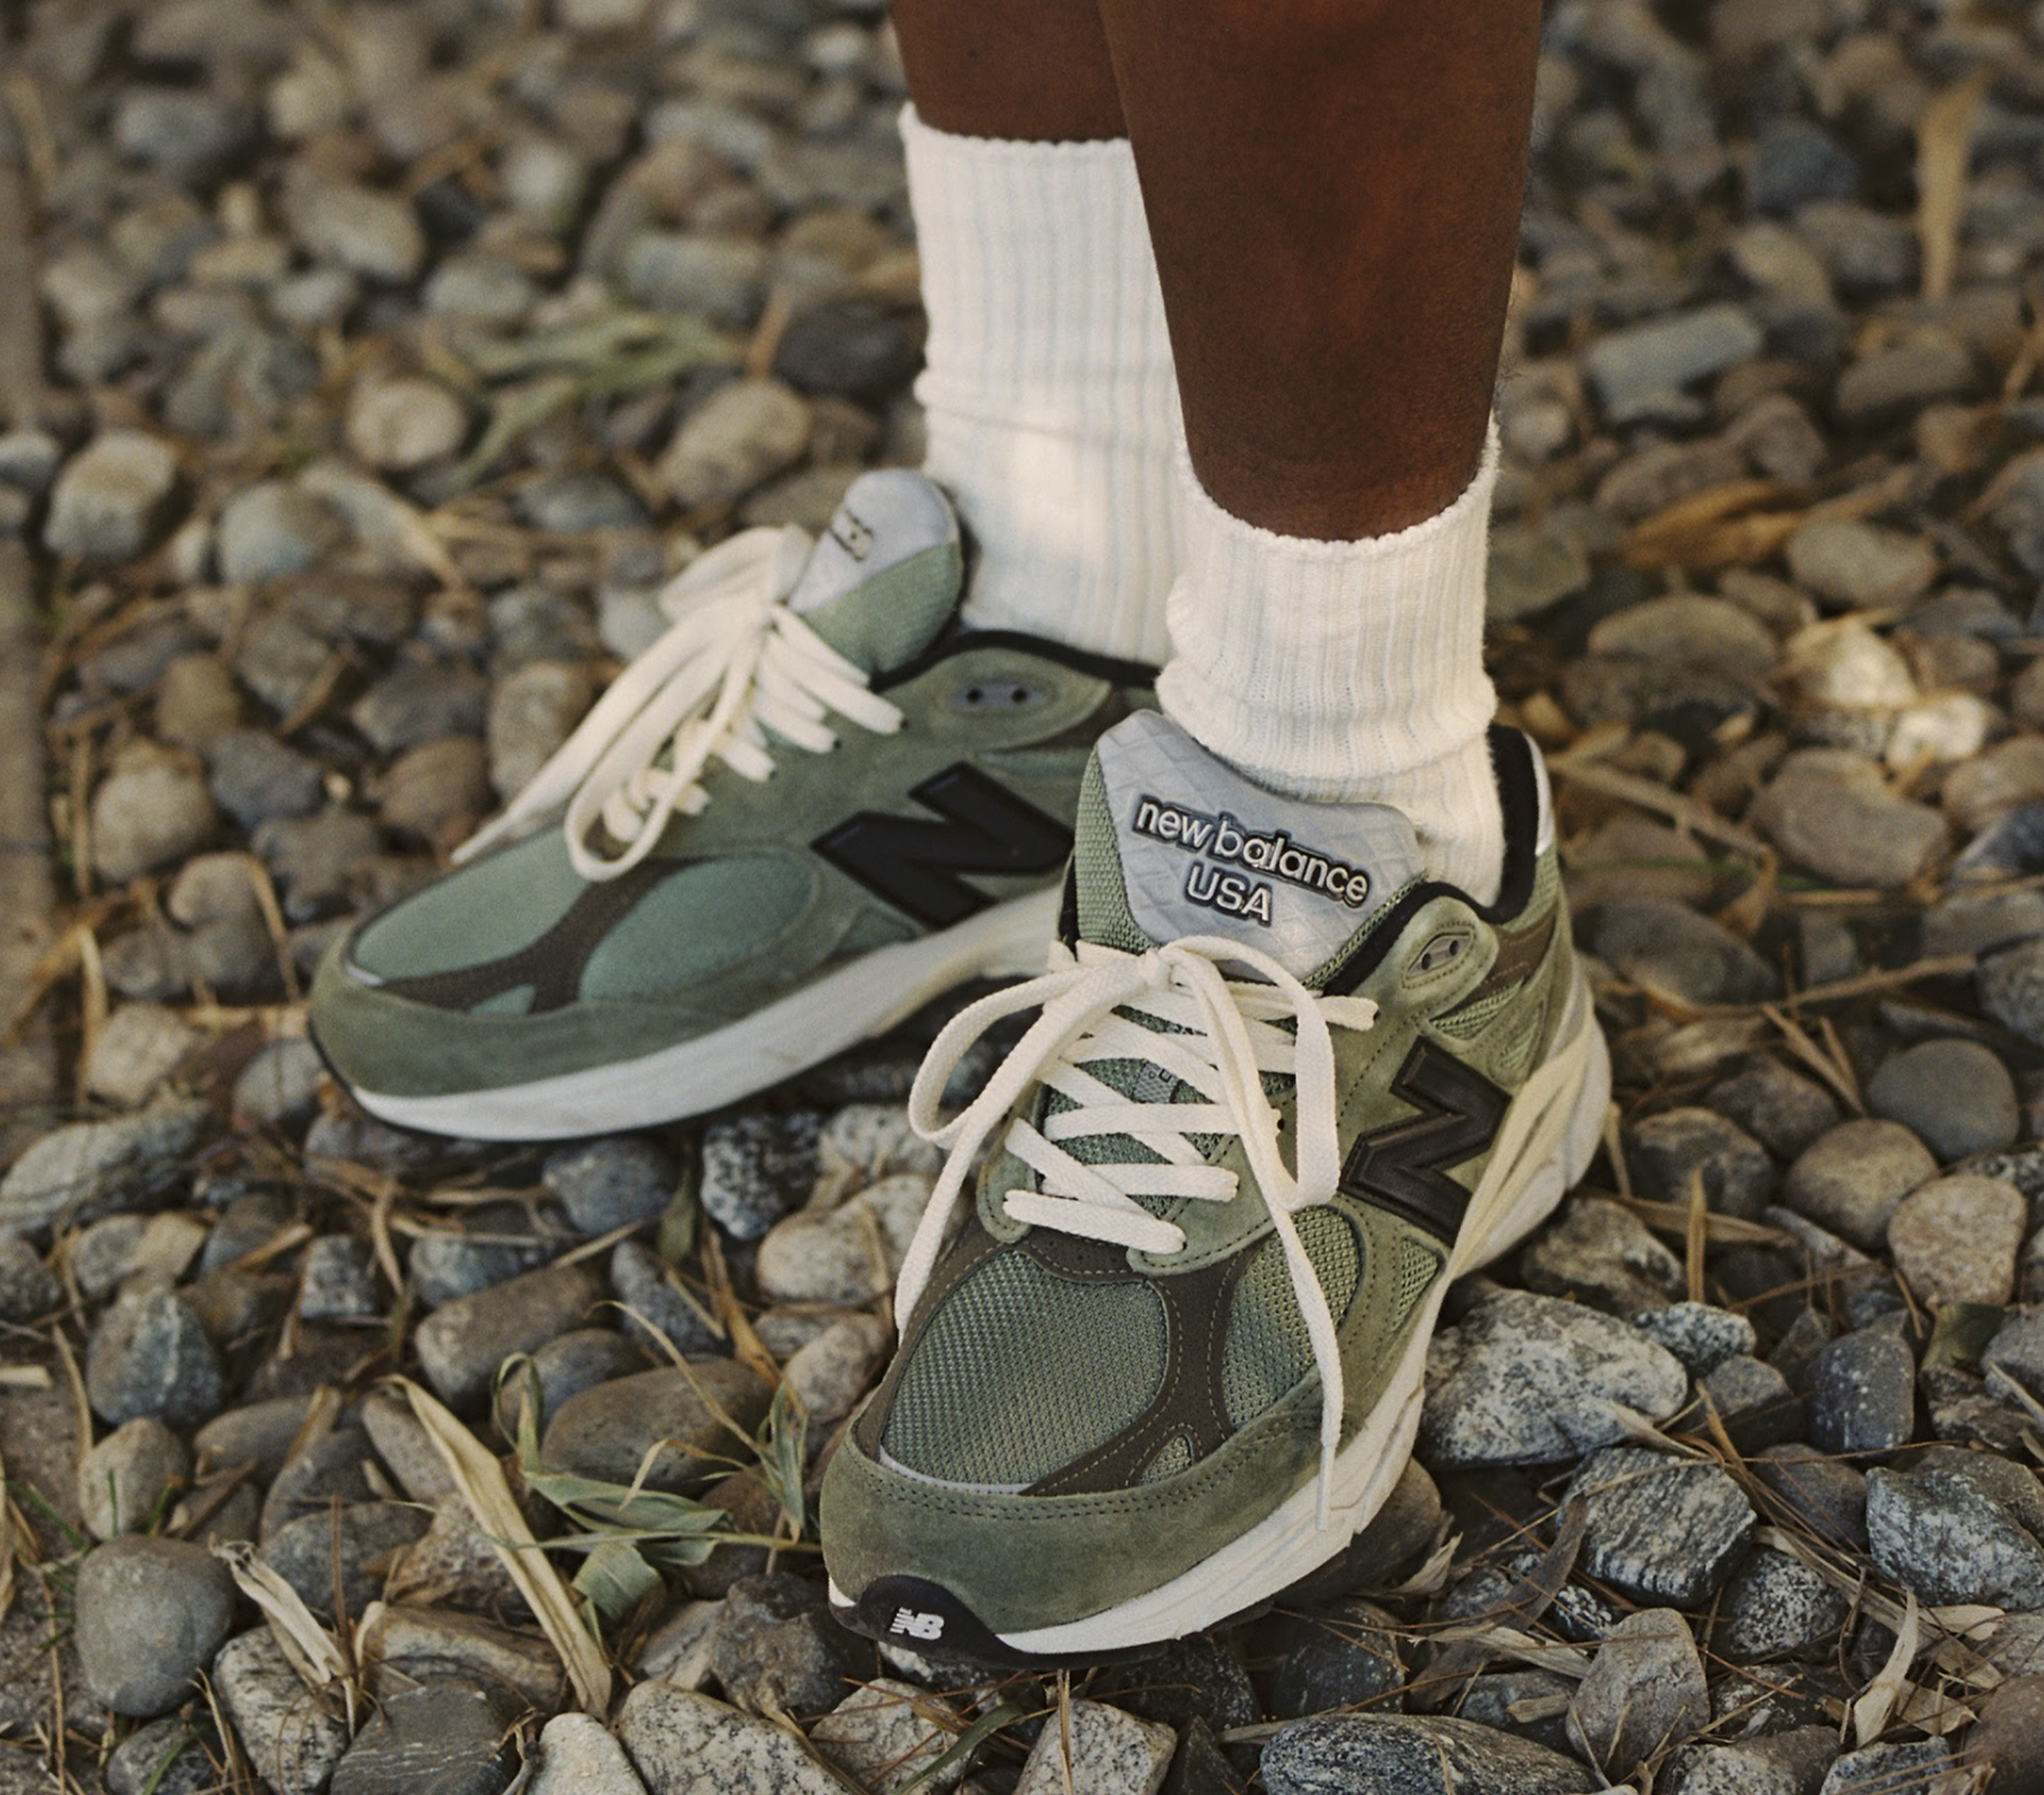 JJJJound's 'Olive' New Balance 990v3 Collab Is Releasing This Week ...